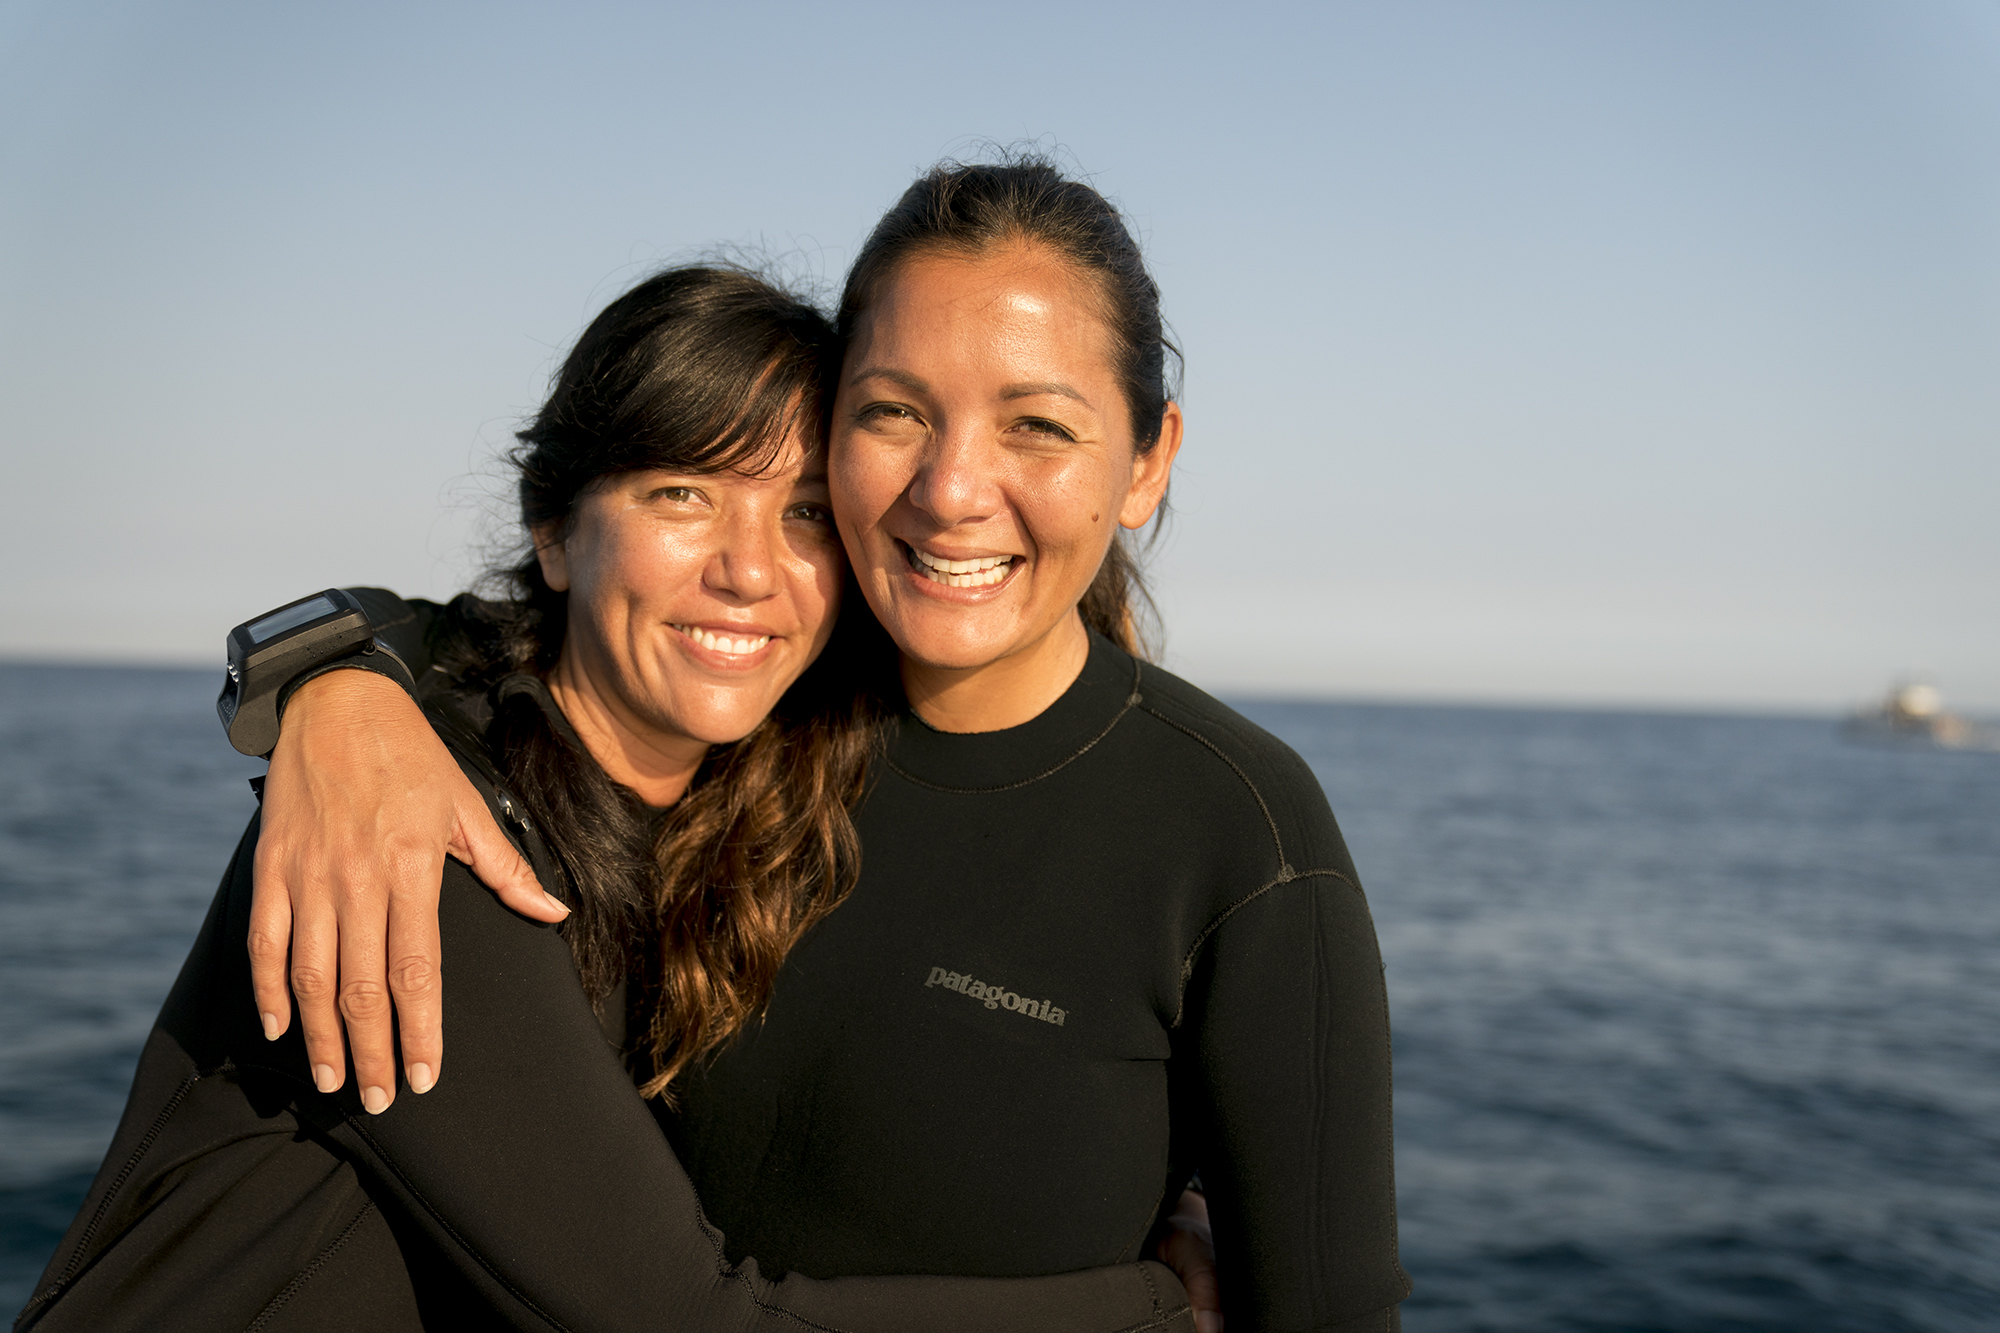 Through one scuba diving trip, sisters Christy and Kimi Werner reunited wit...